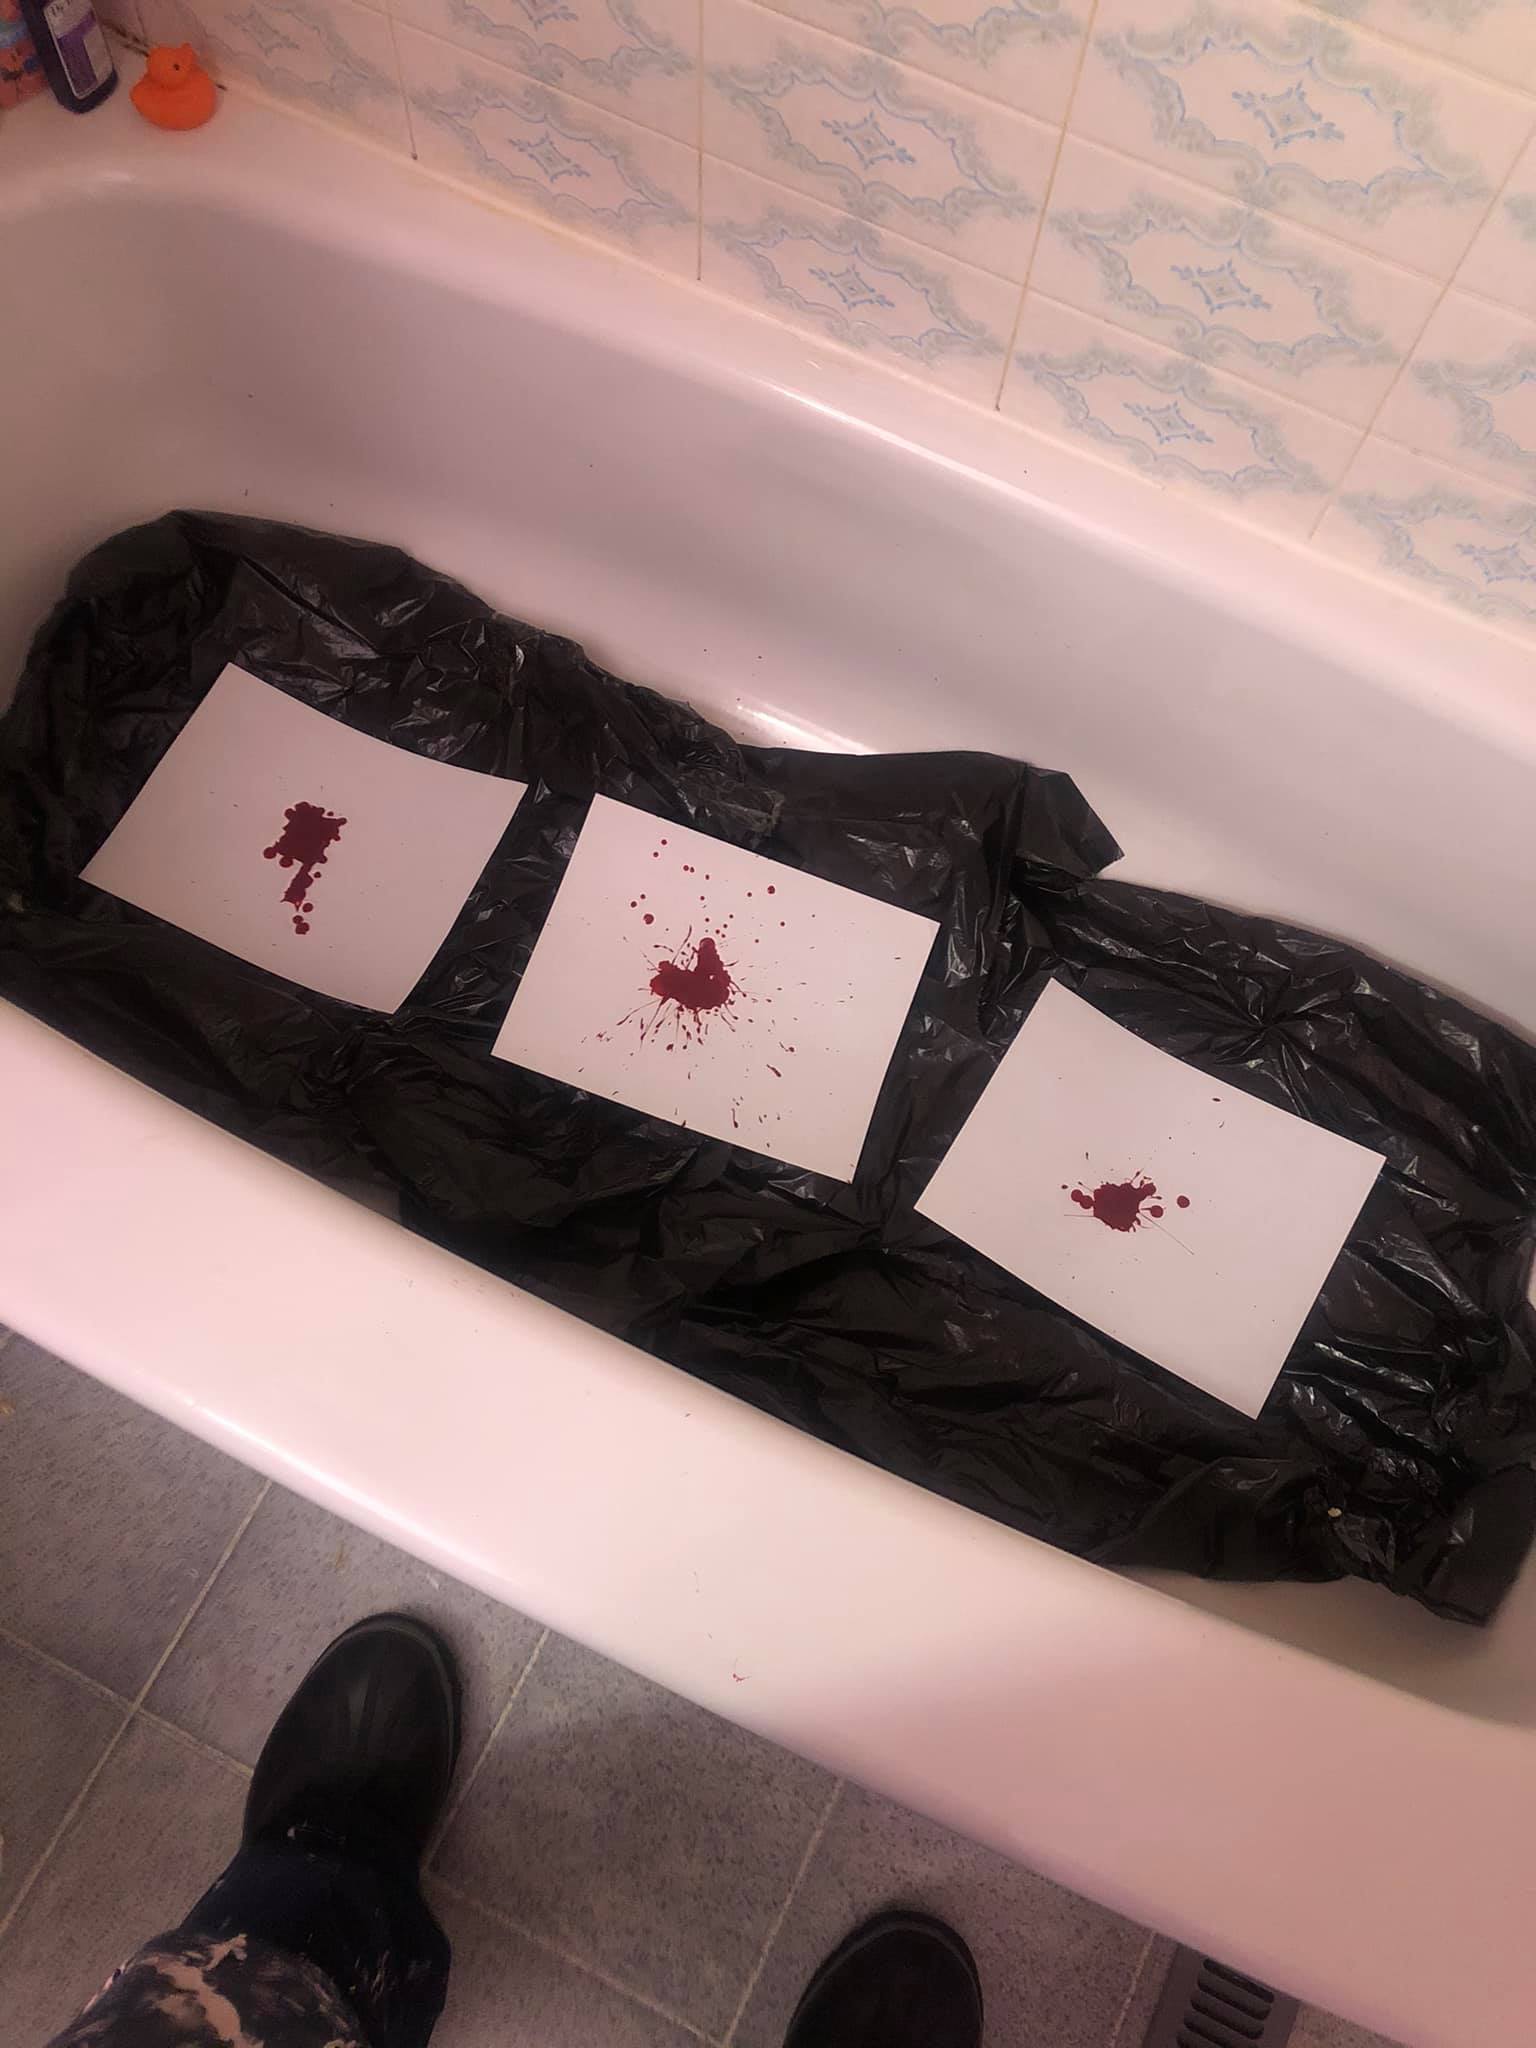 Three bloody pools on three canvases in the tub.